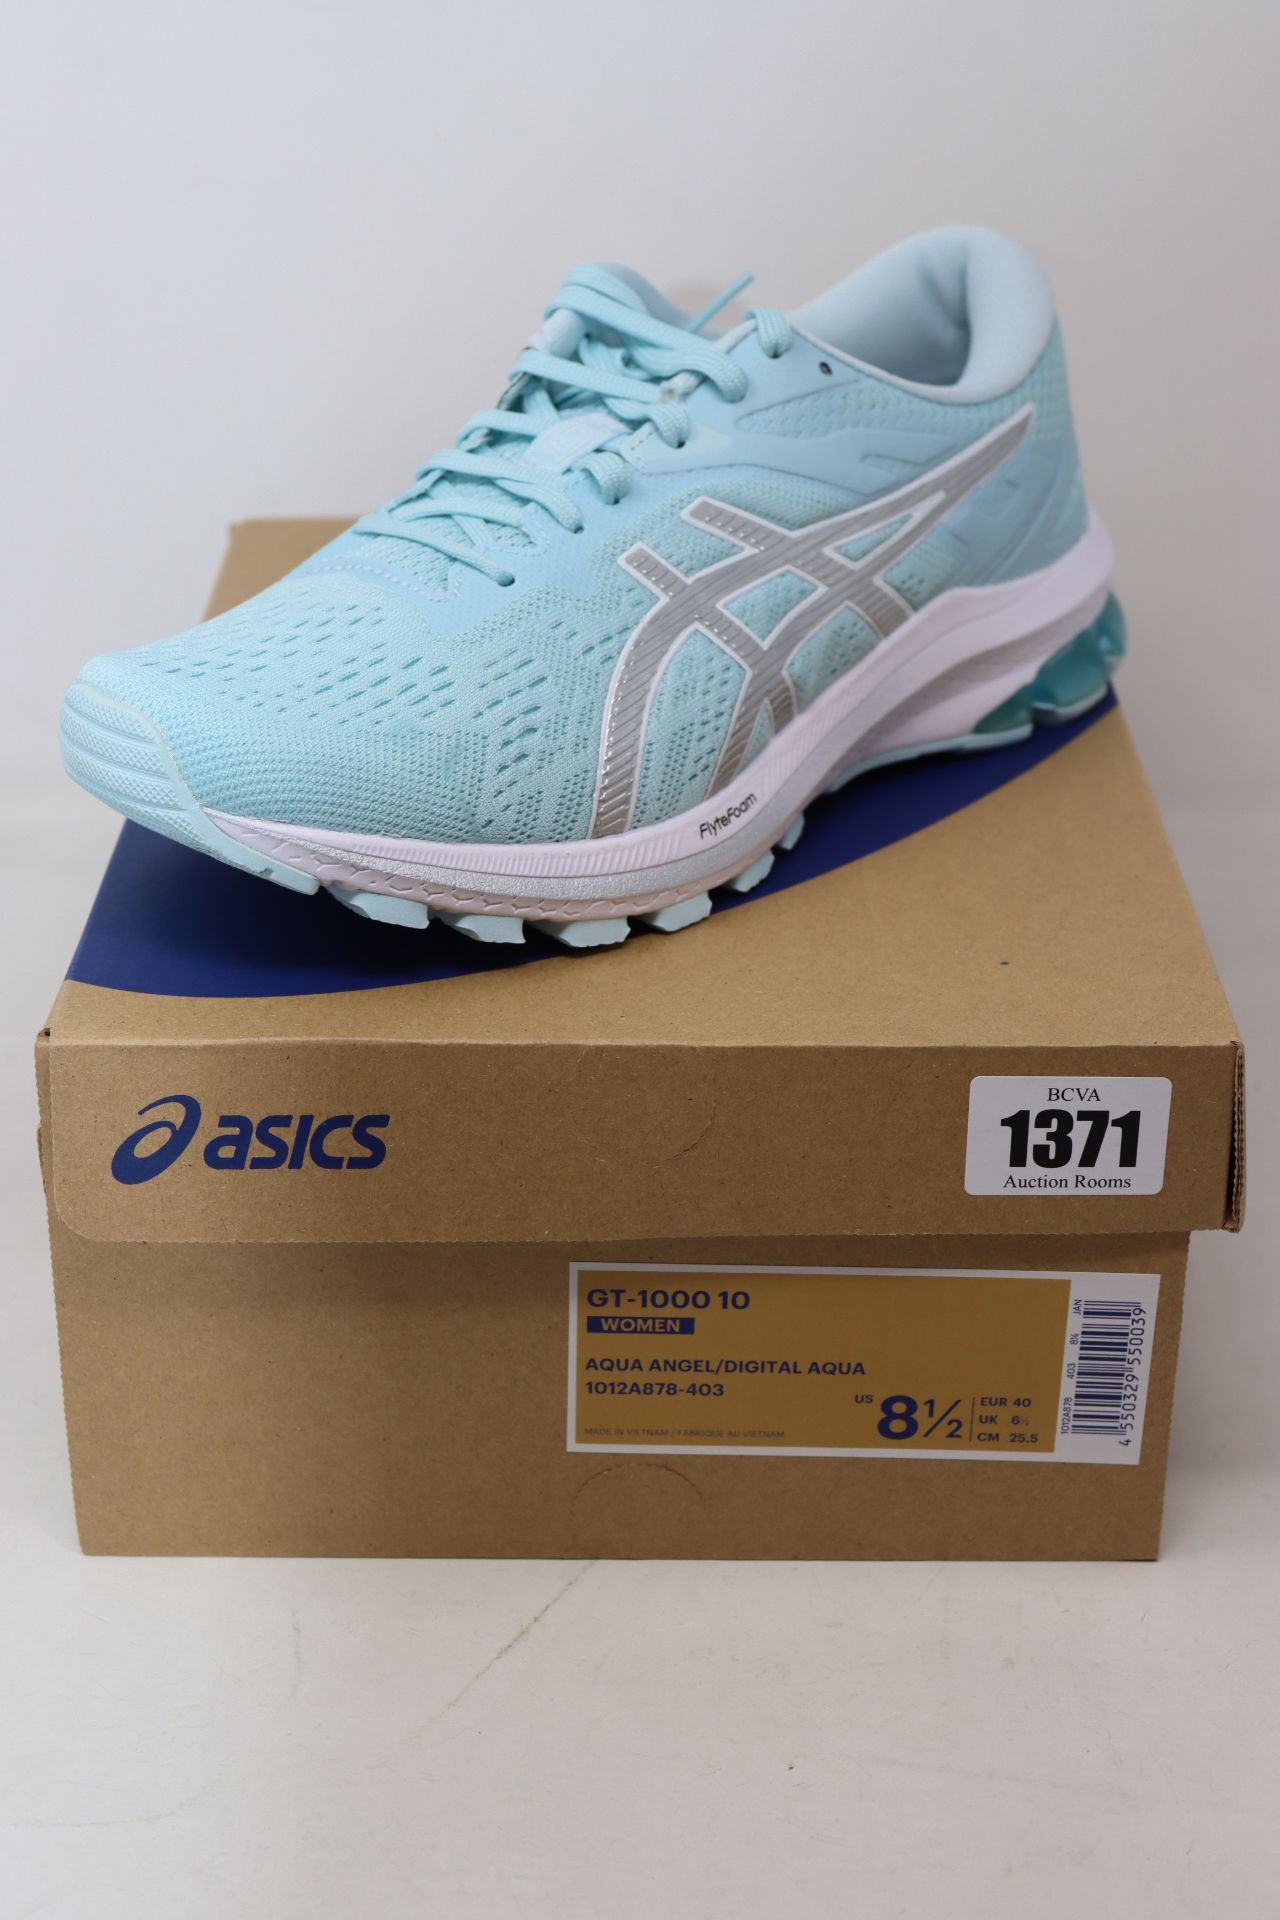 A pair of women's as new Asics GT-1000 10 trainers (UK 6.5).